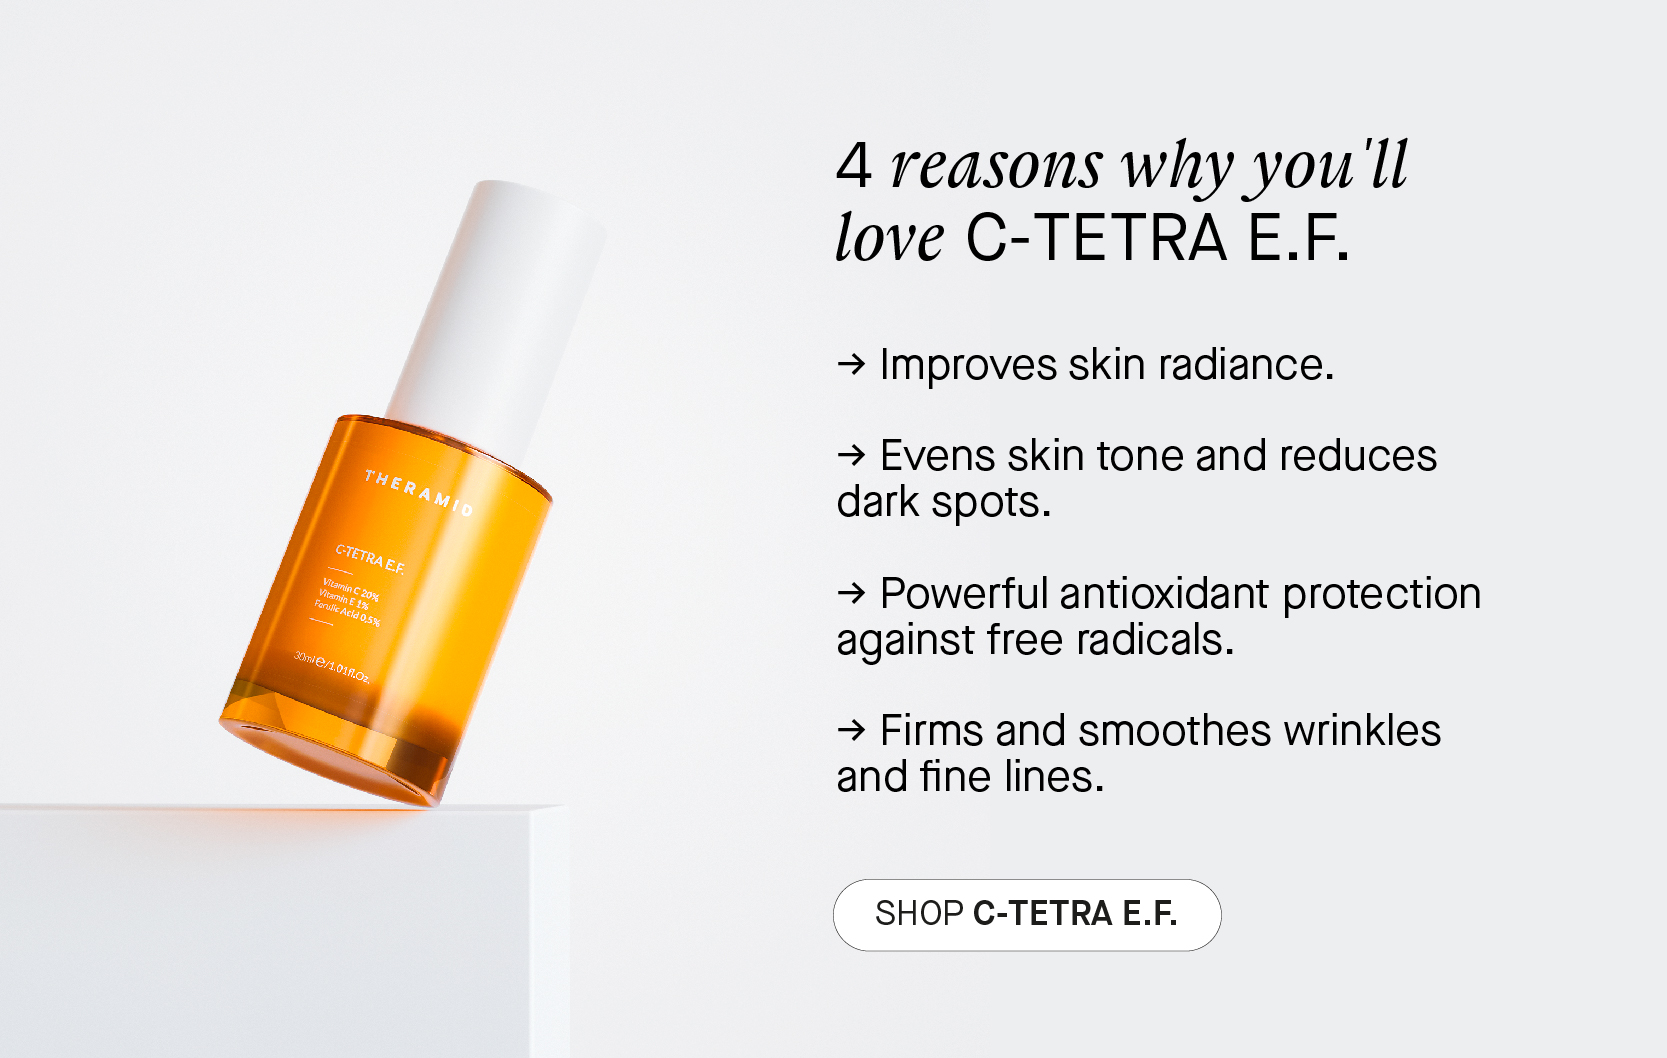  4 reasons why you ll love C-TETRA E.F. - Improves skin radiance. - Evens skin tone and reduces dark spots. - Powerful antioxidant protection against free radicals. - Firms and smoothes wrinkles and fine lines. SHOPC-TETRAEF. 